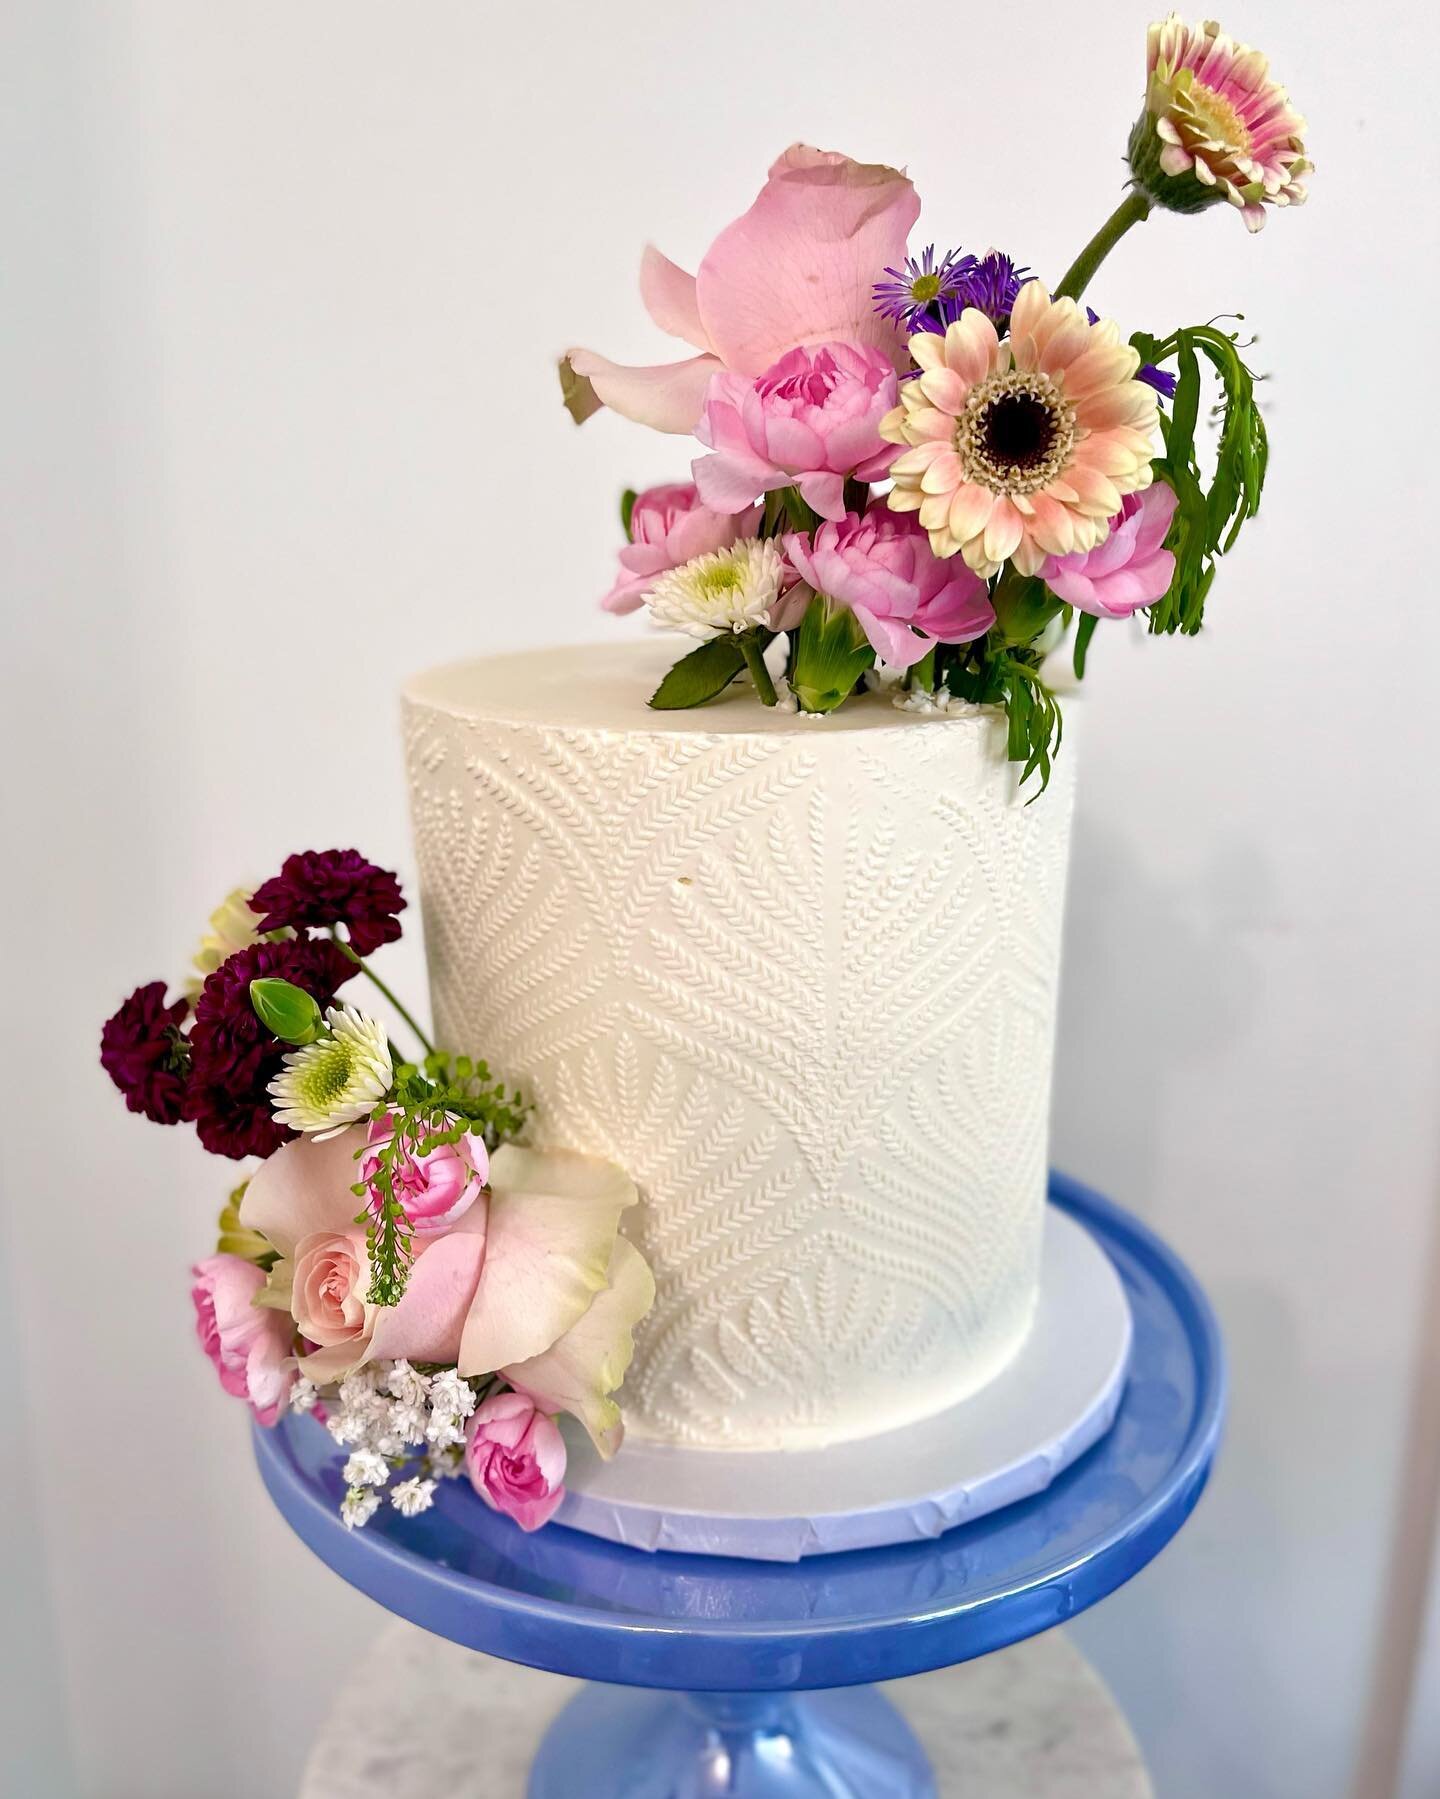 Perfect summer florals make for the best cake decoration 🌸 💐 🌺